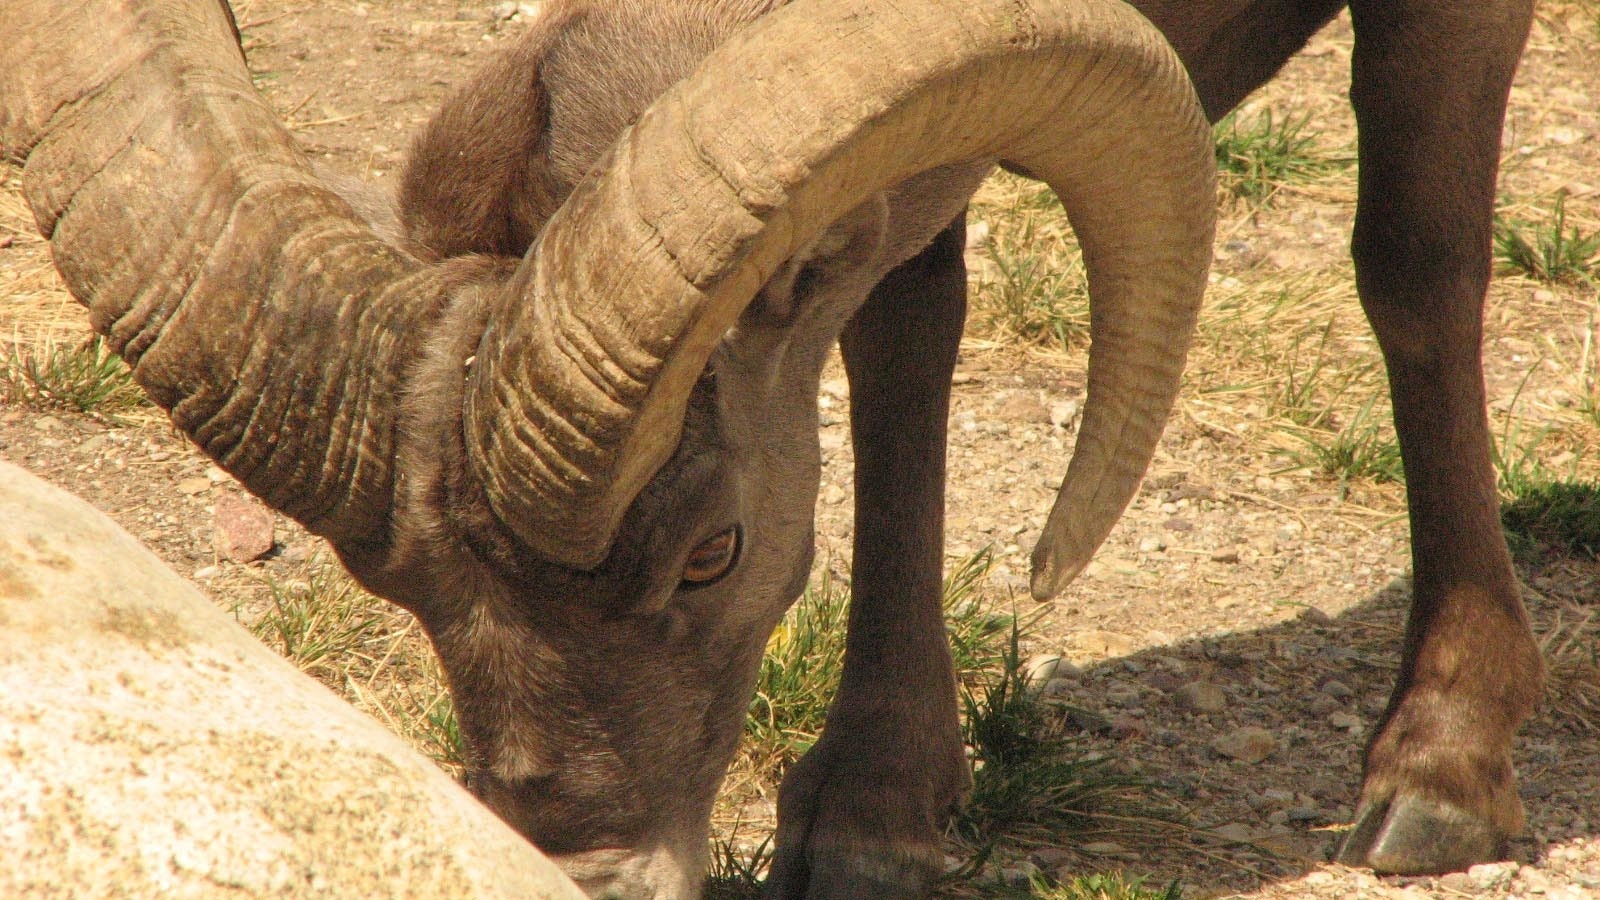 Bam-Bam, a bighorn sheep ram that lived in Sinks Canyon State Park near Lander, is pictured here eating dirt. That’s a common practice among bighorns, to get mineral nutrients from the dirt.